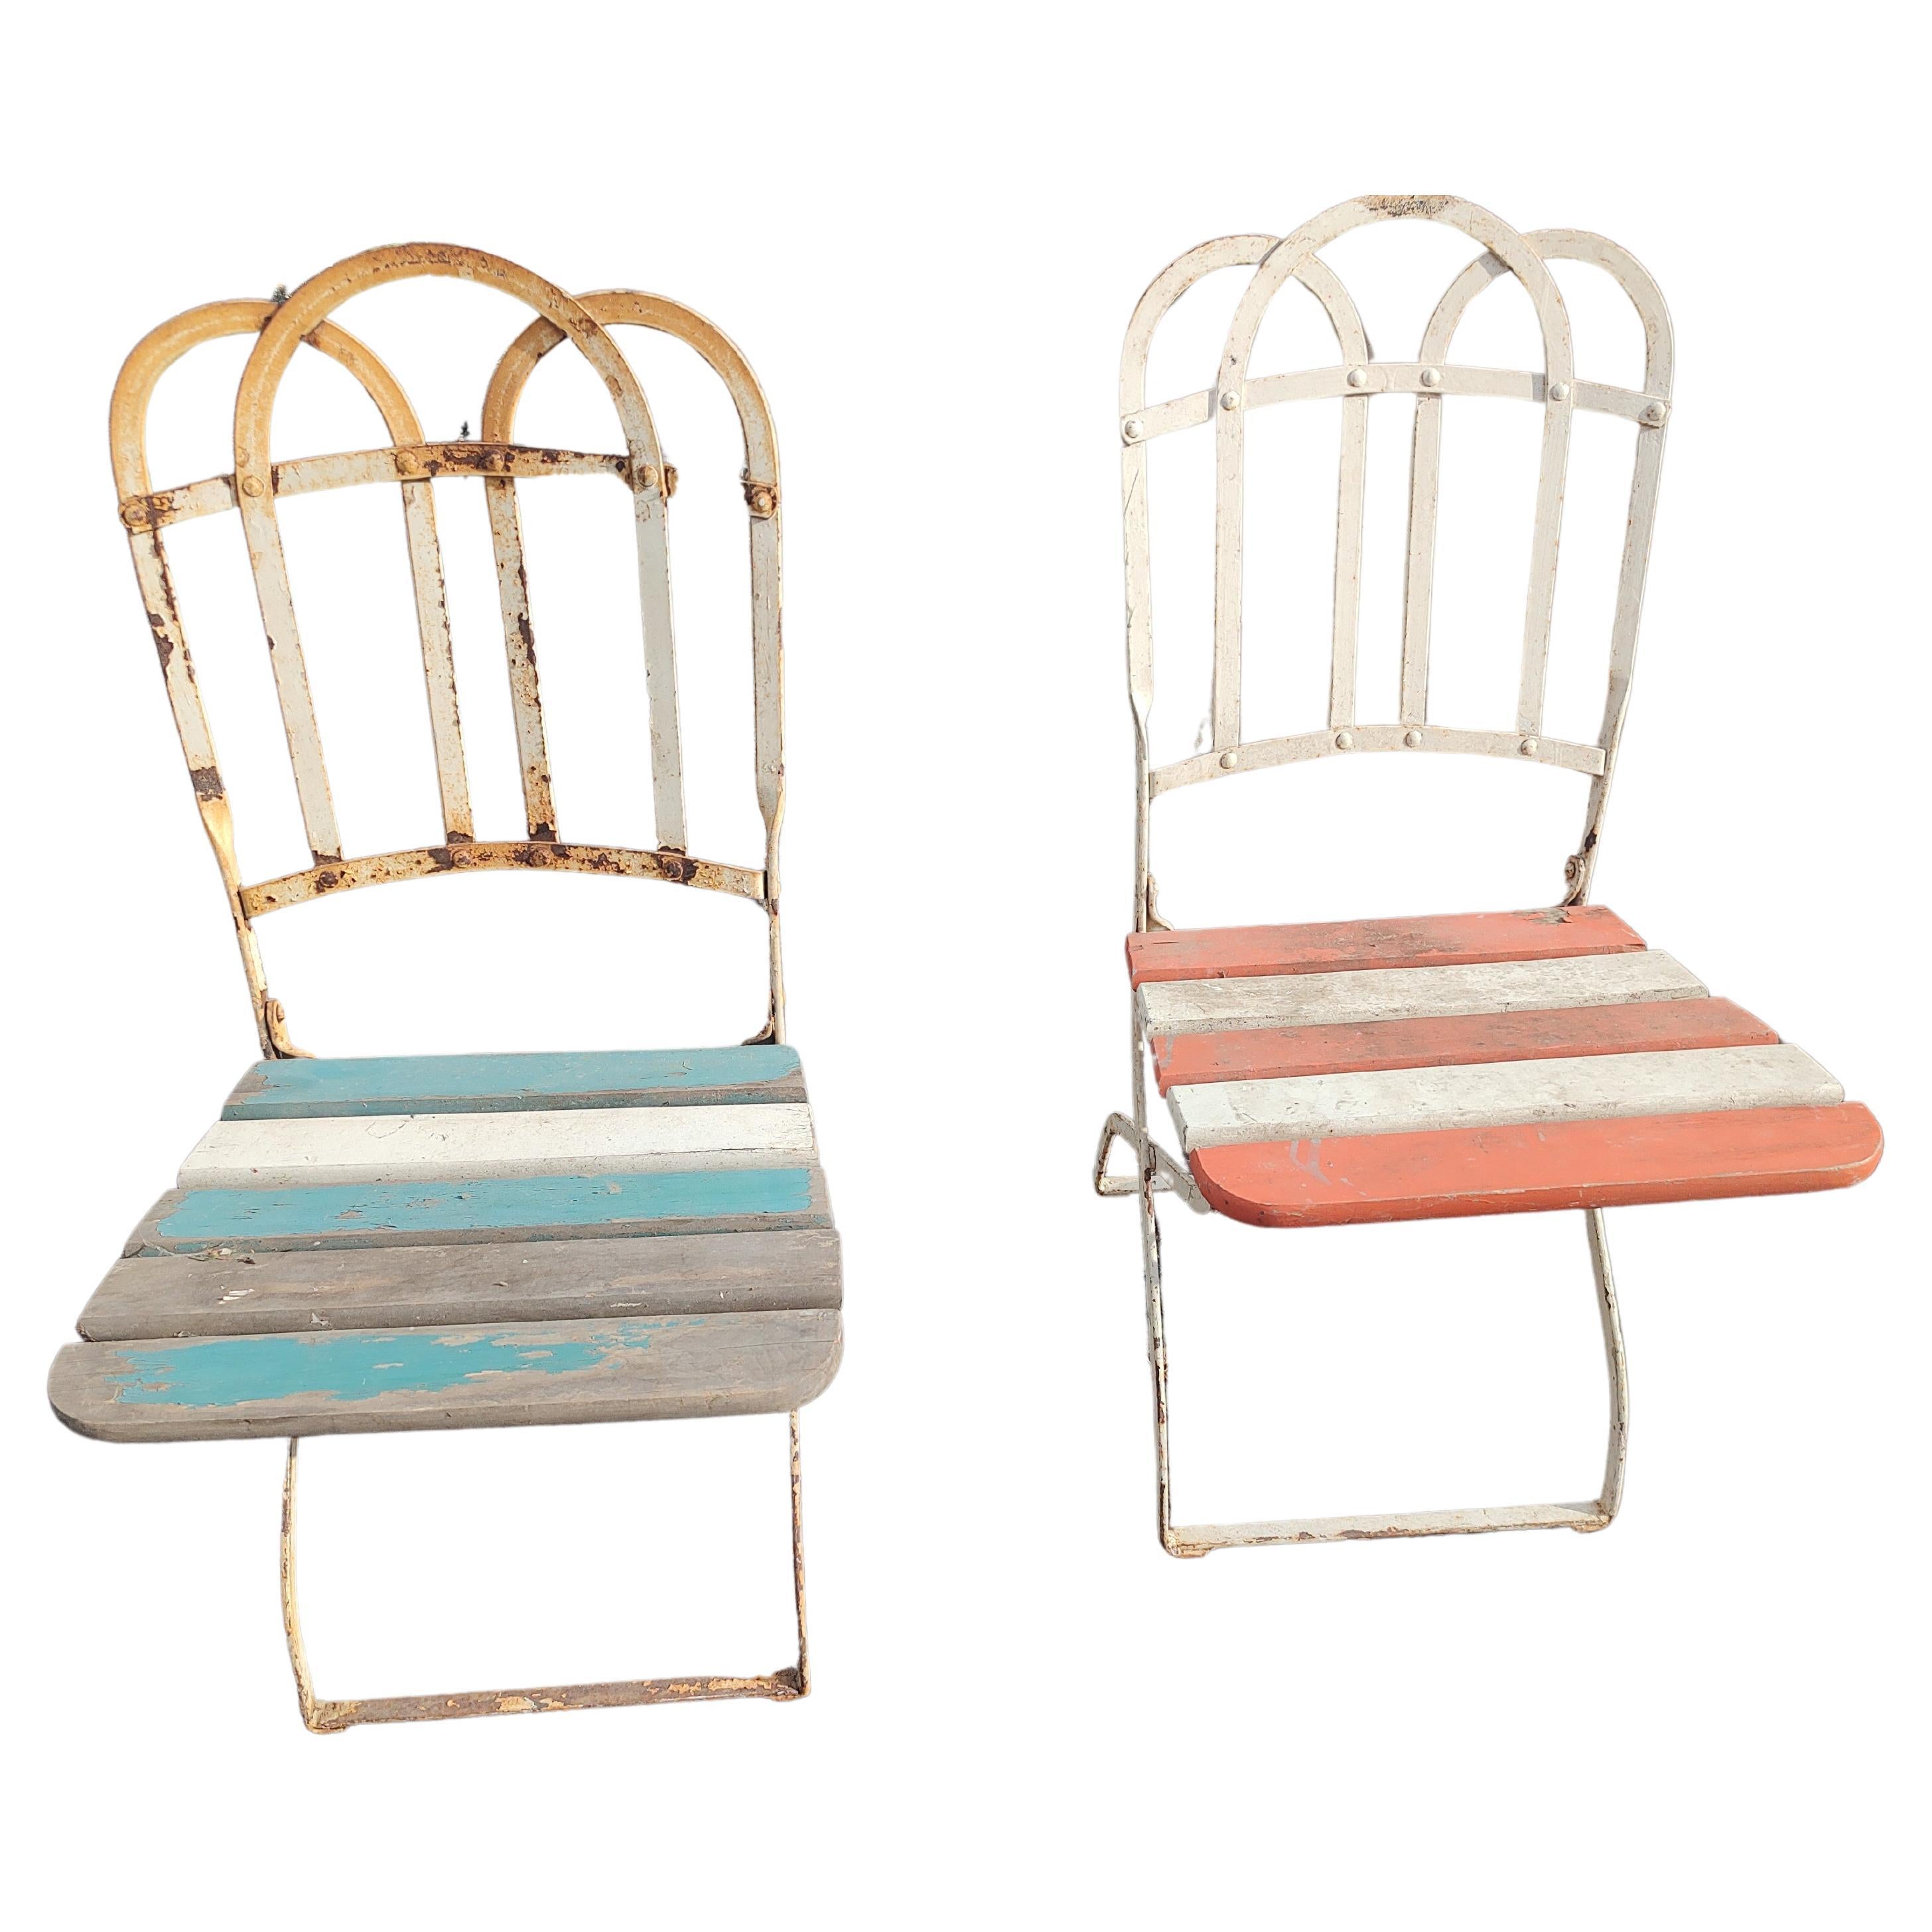 Set of 8 French Fold-up Iron with Slatted Wood Cafe Garden Dining Chairs C1920 For Sale 2